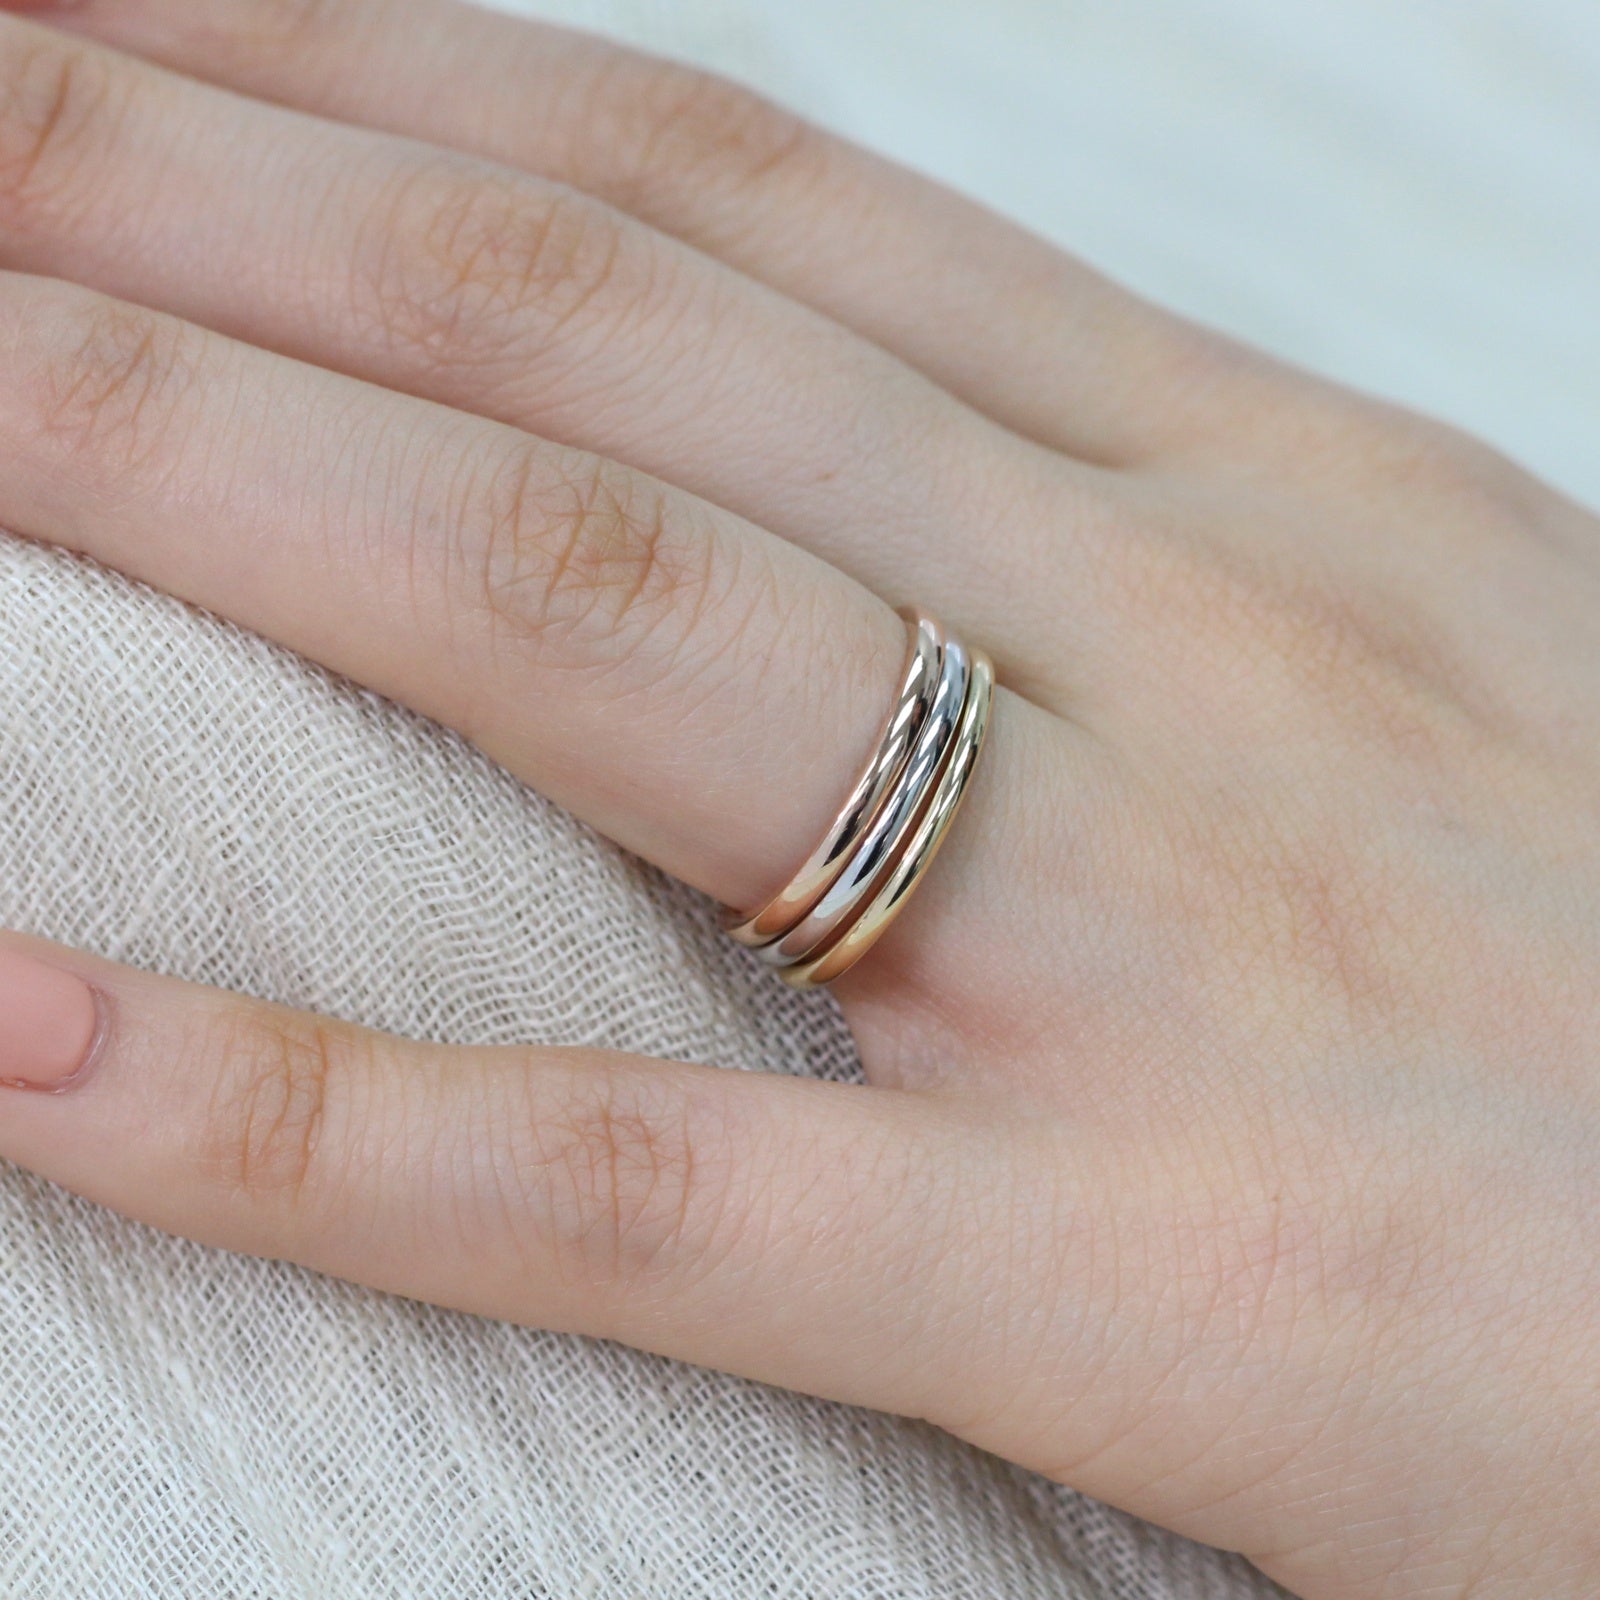 Plain gold wedding band solid 14k rose gold ring by la more design jewelry